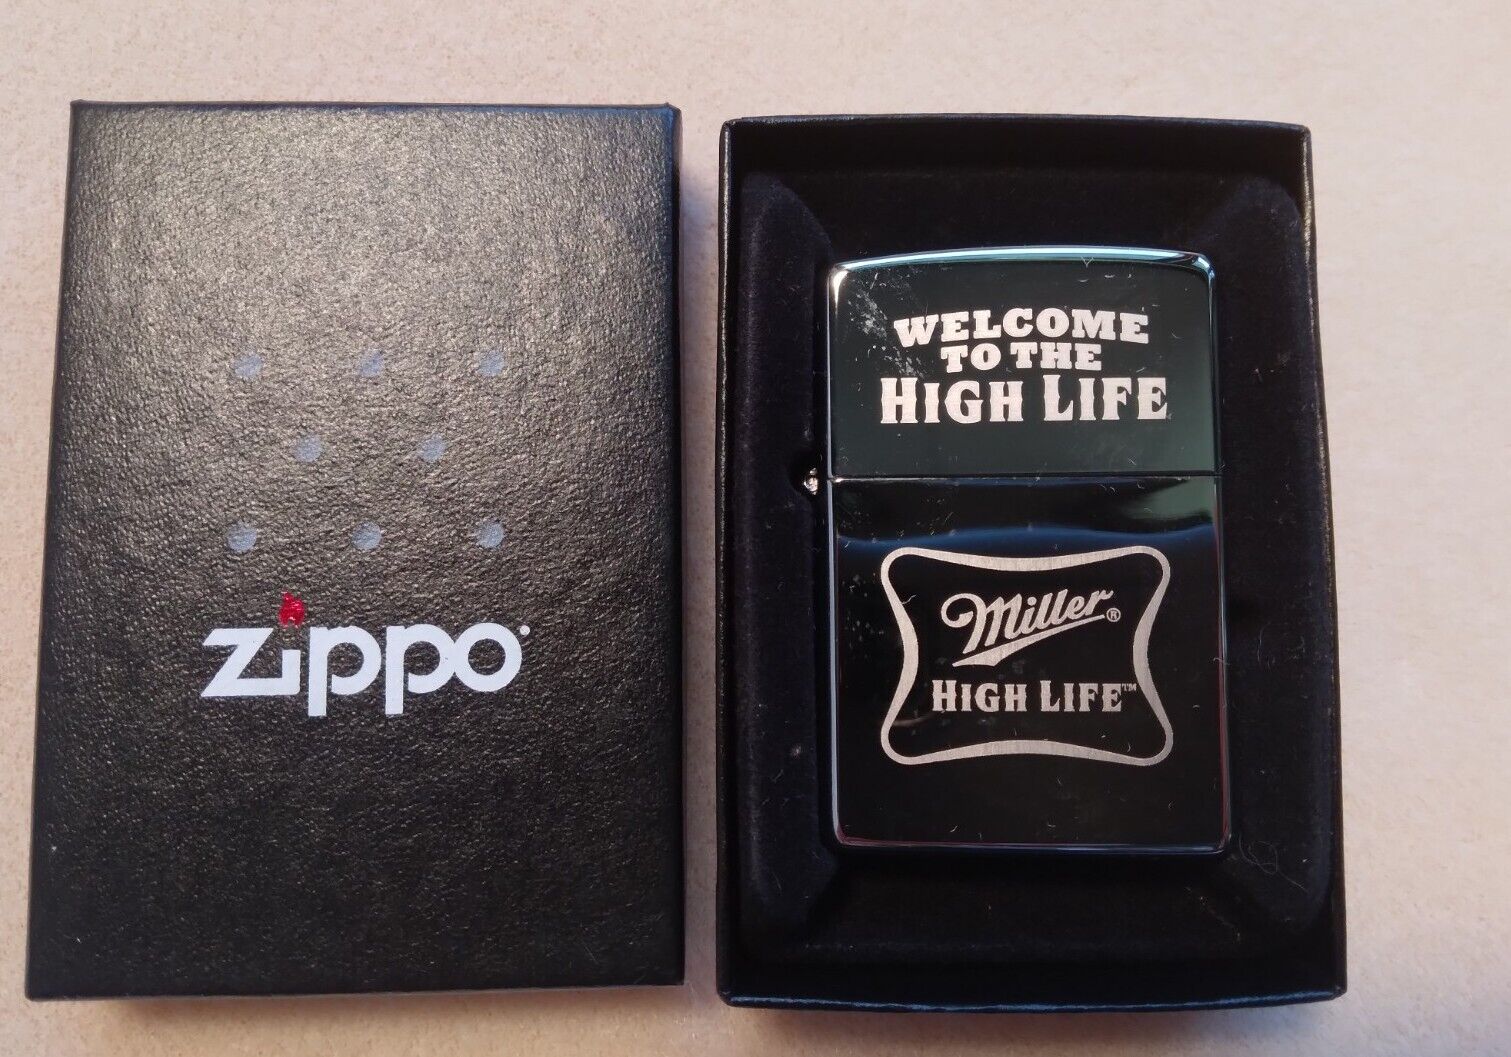 Miller High Life Zippo Collectable Lighter In Box 2007 Welcome To The High Life